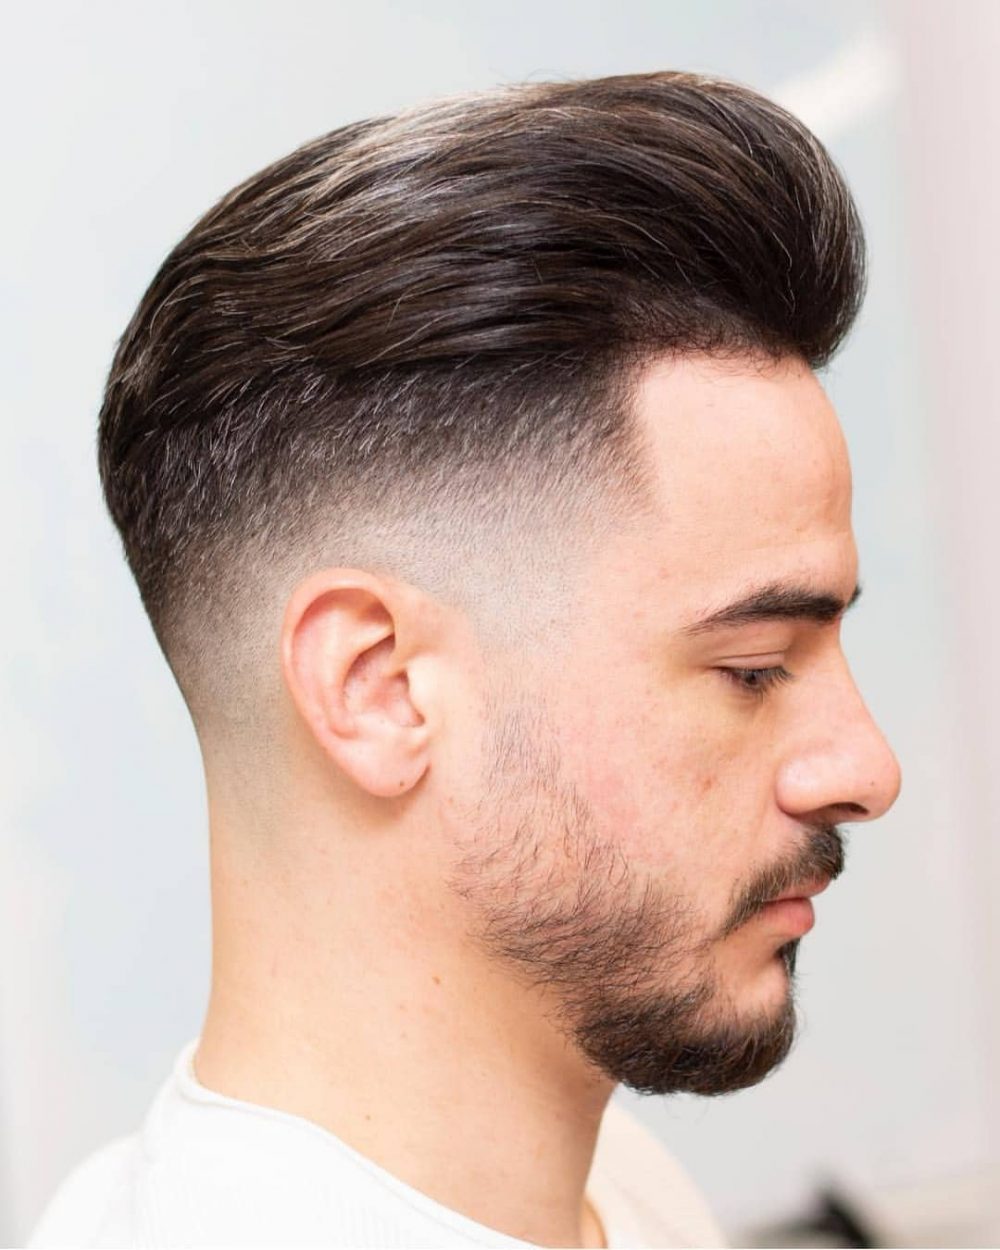 21 Best Pompadour Fade Haircuts for Men in 2022